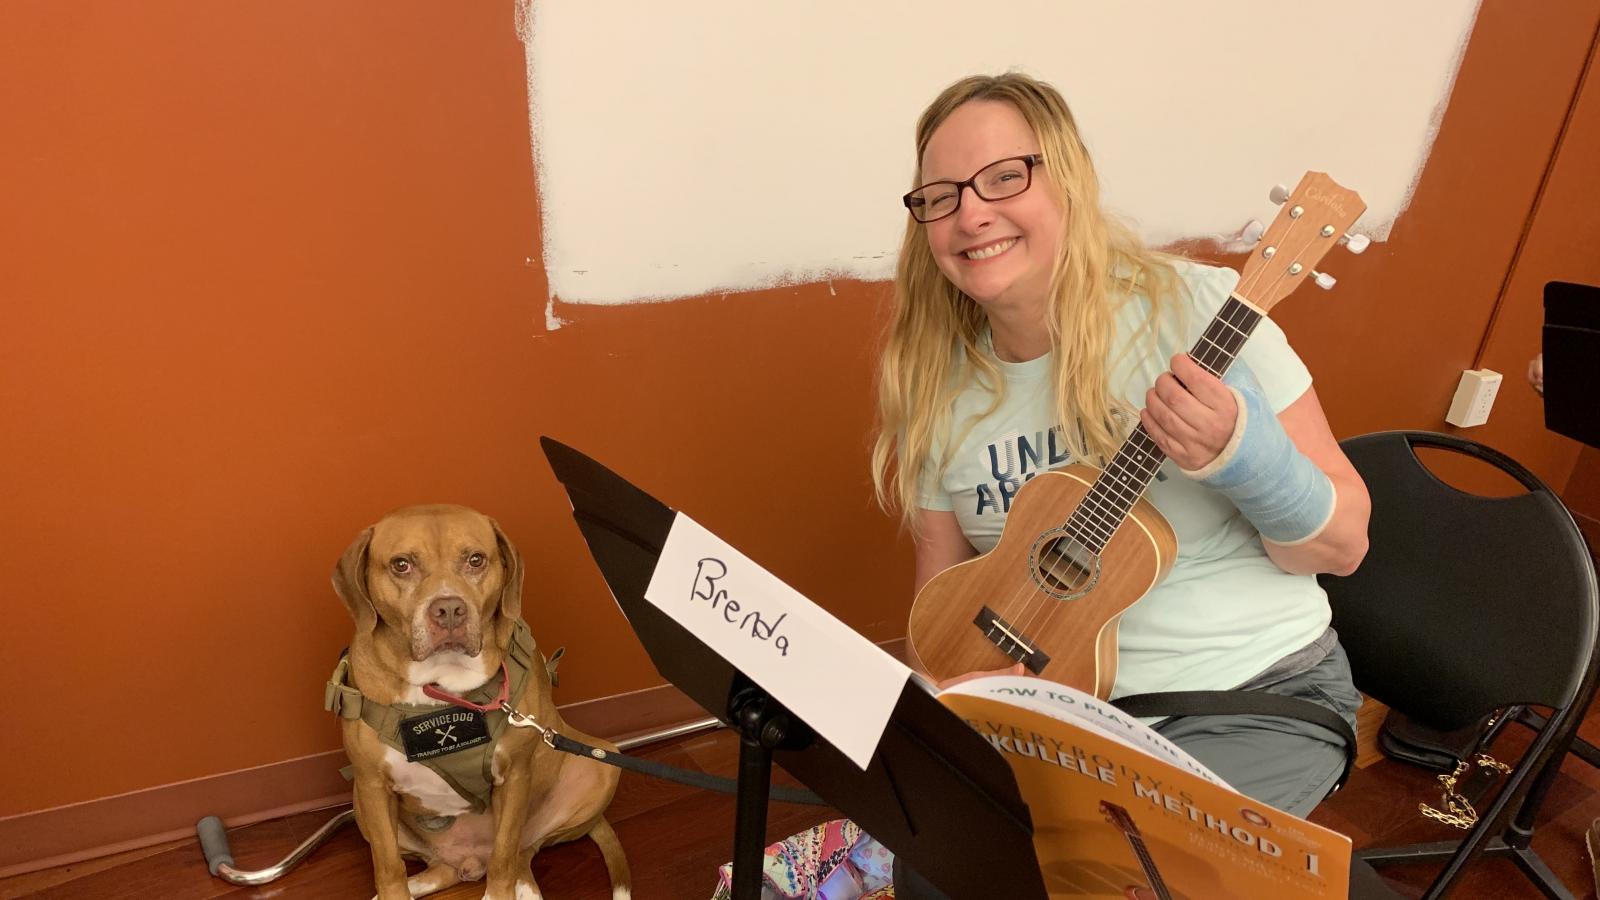 Woman with ukelele sitting and smiling with service dog sitting next to her.